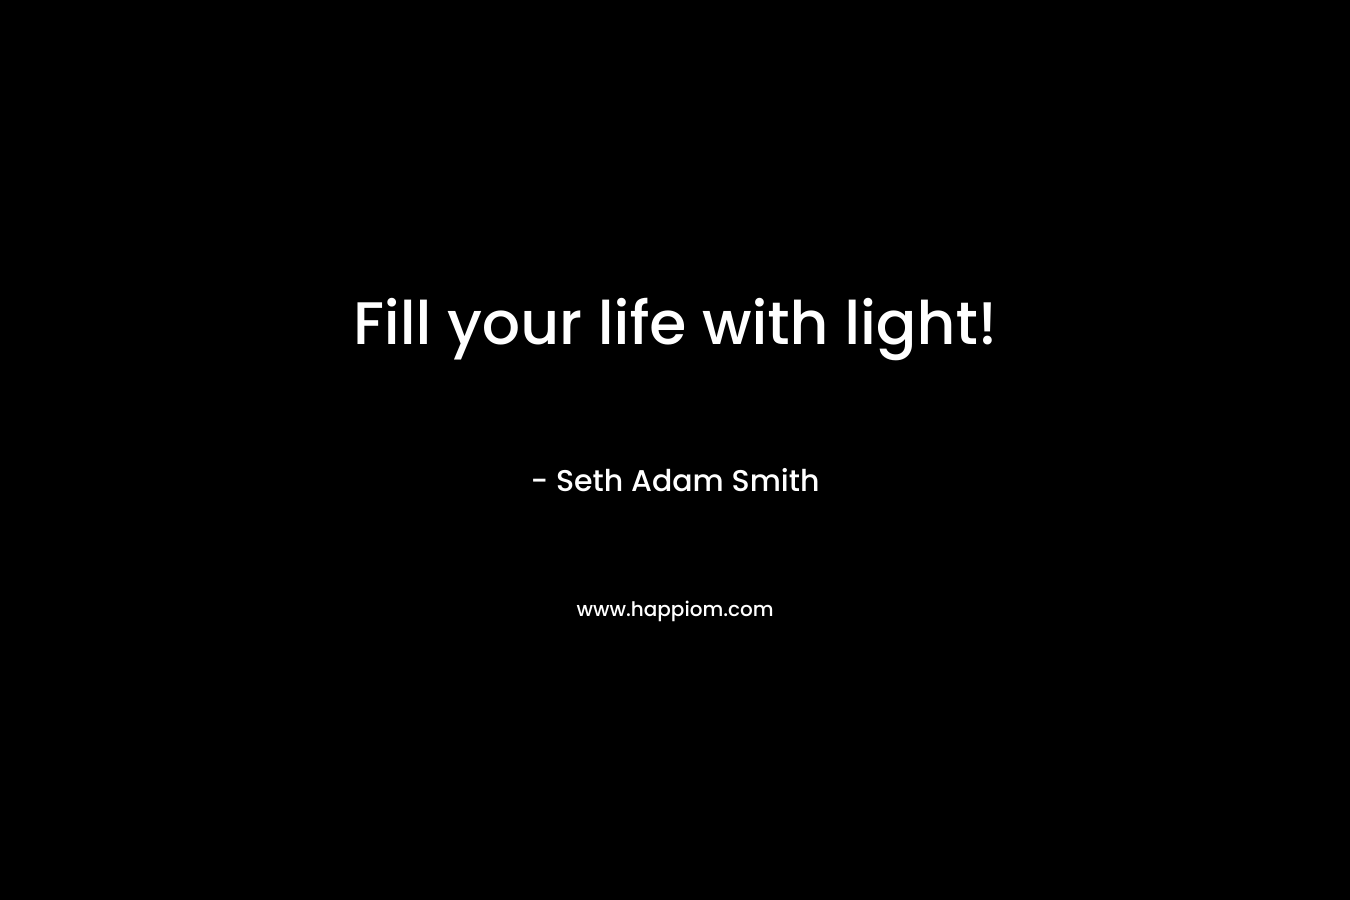 Fill your life with light!